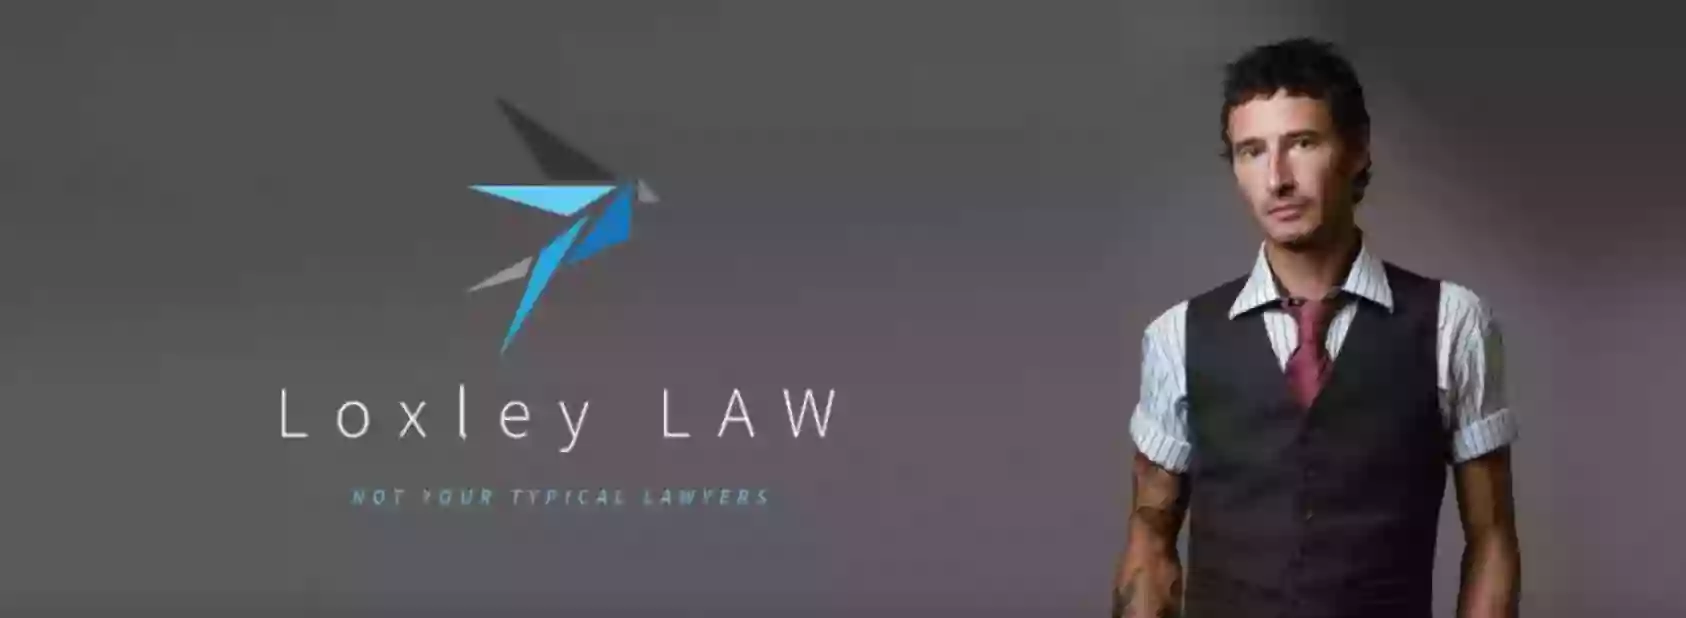 Loxley LAW